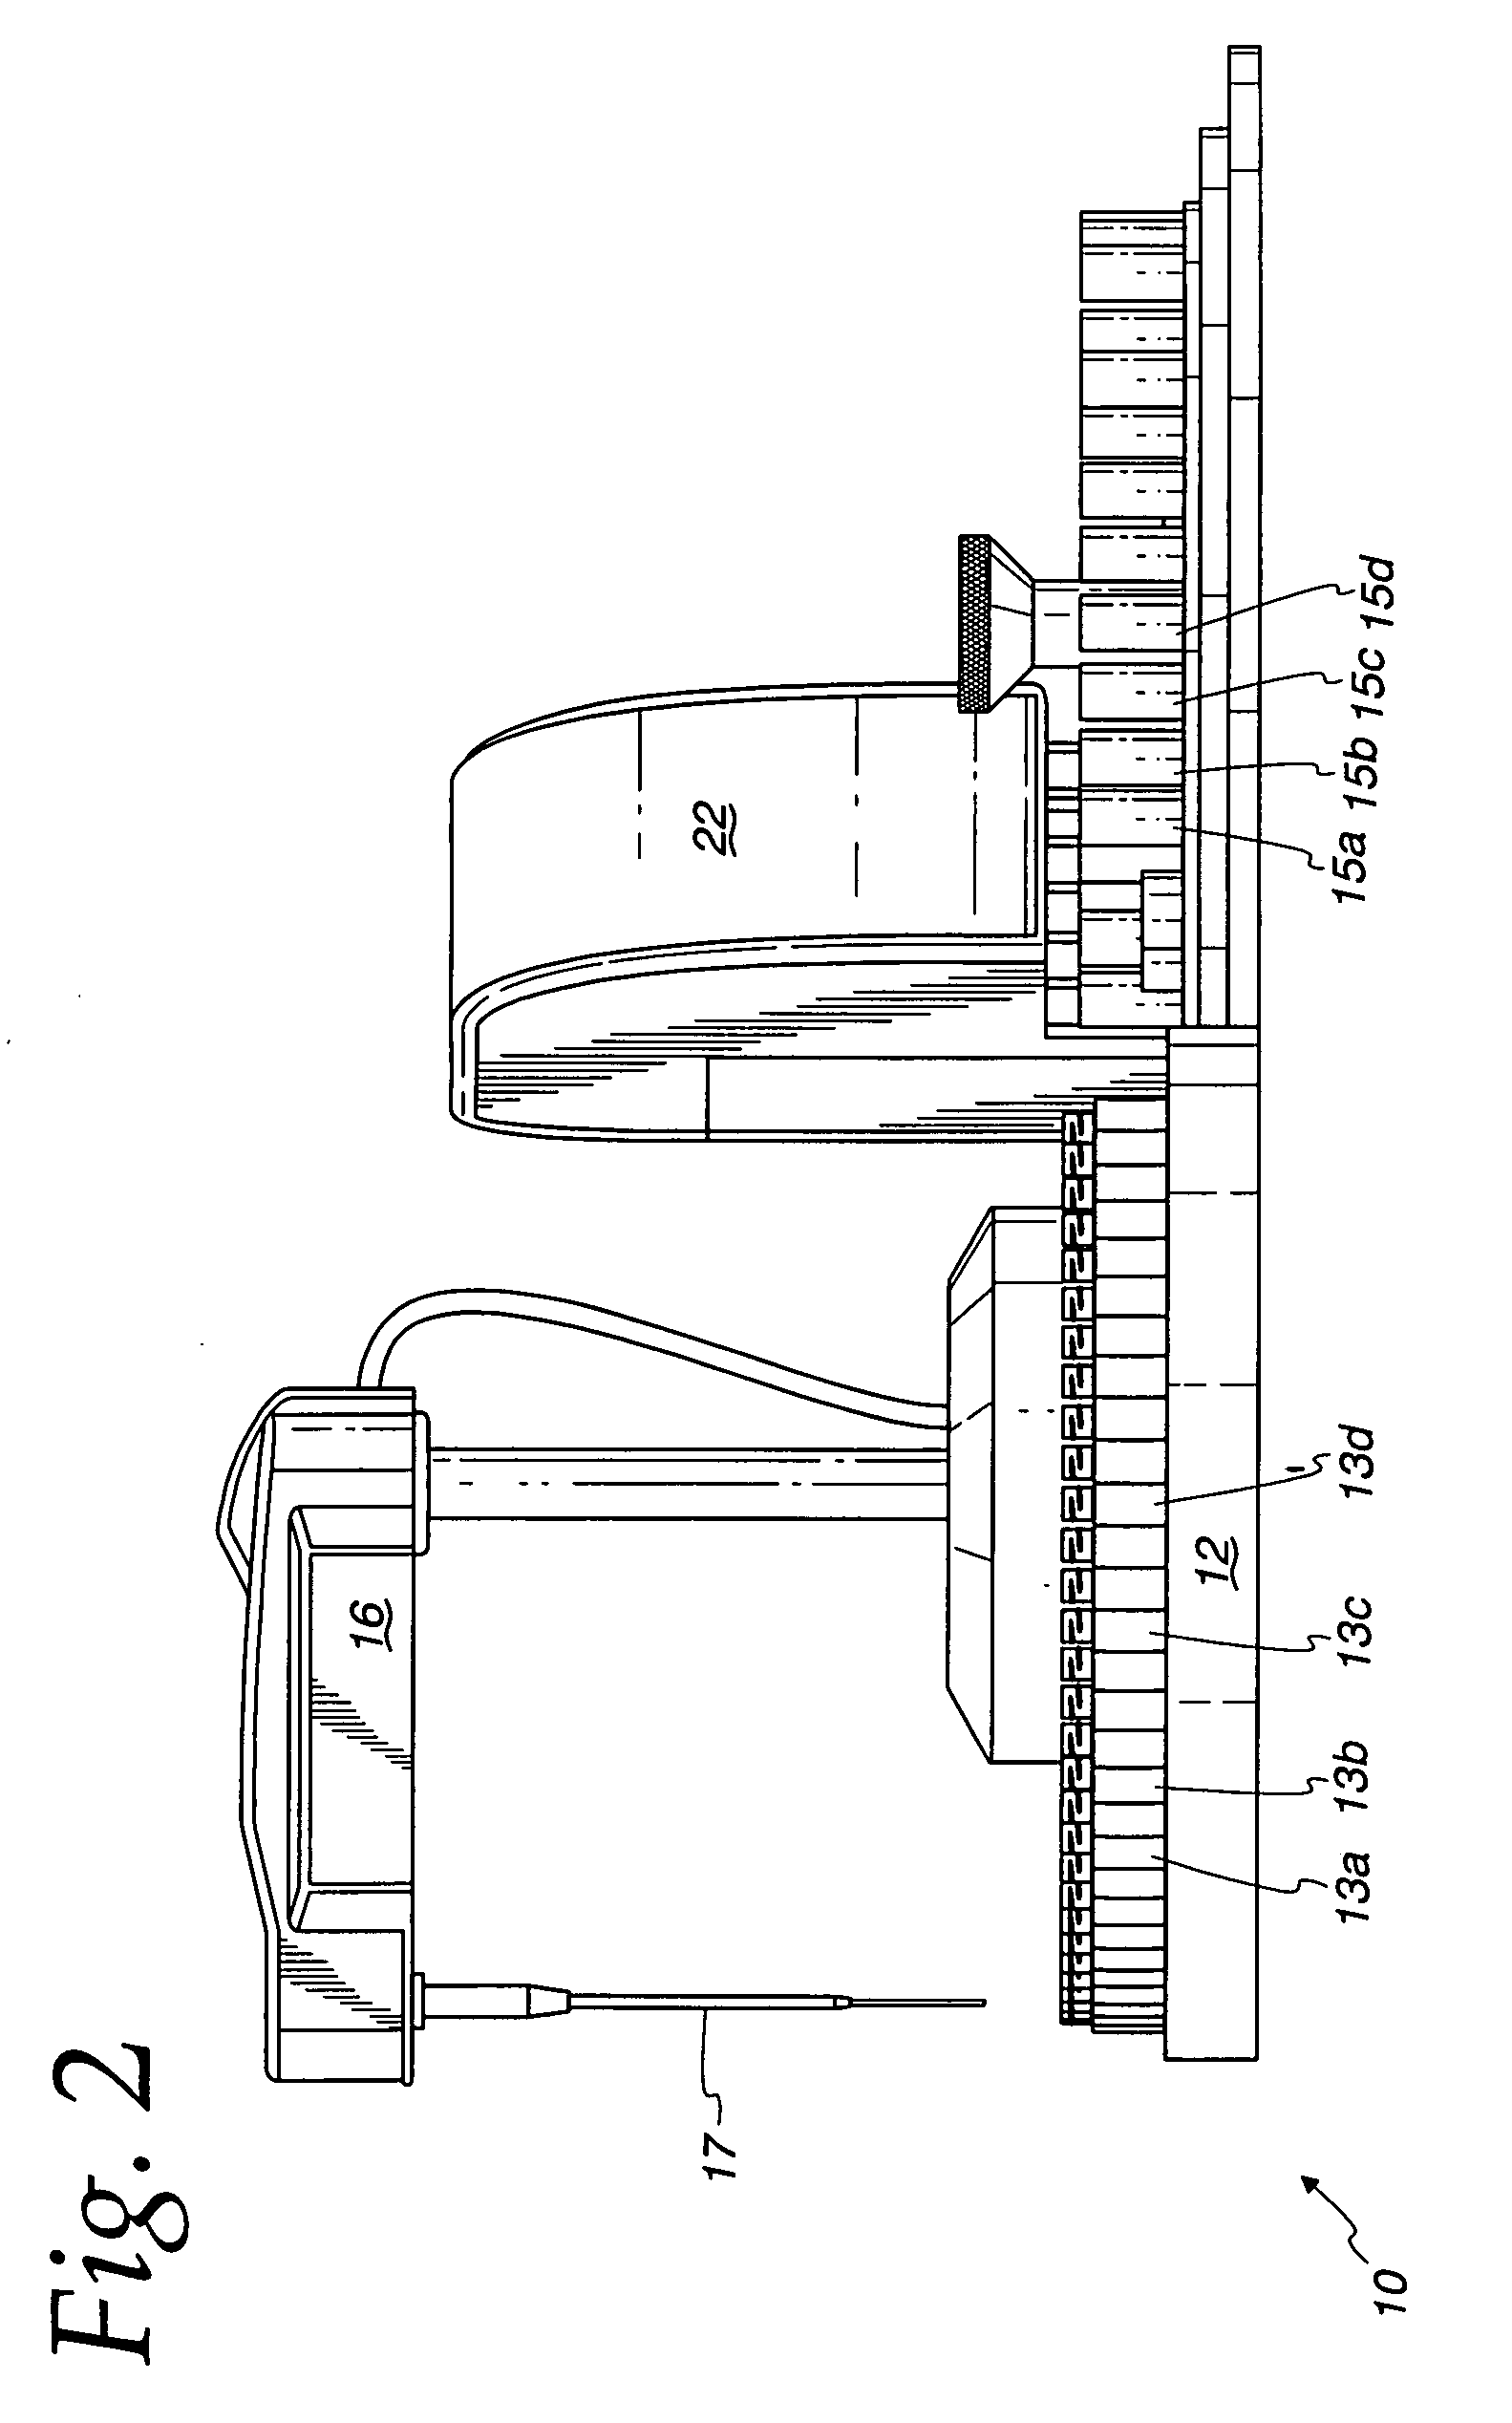 Reagent, system and method for nitrate analysis